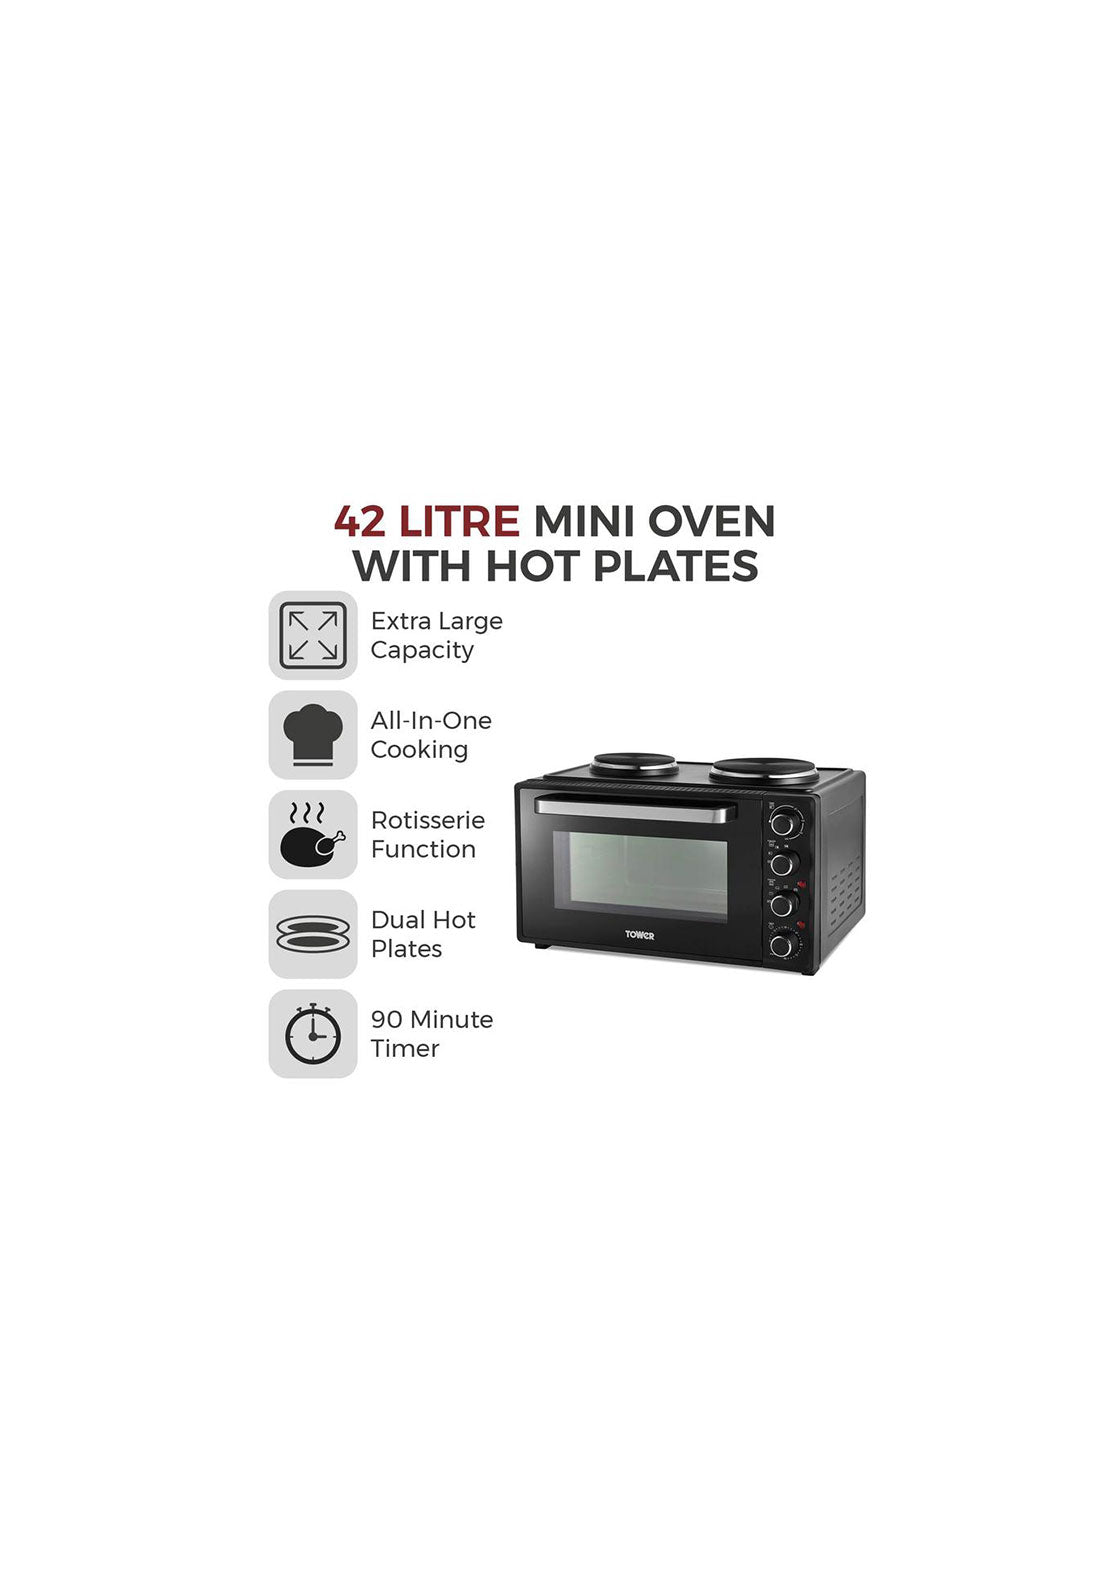 Tower 42L Mini Oven With Hot Plates | T14045 10 Shaws Department Stores